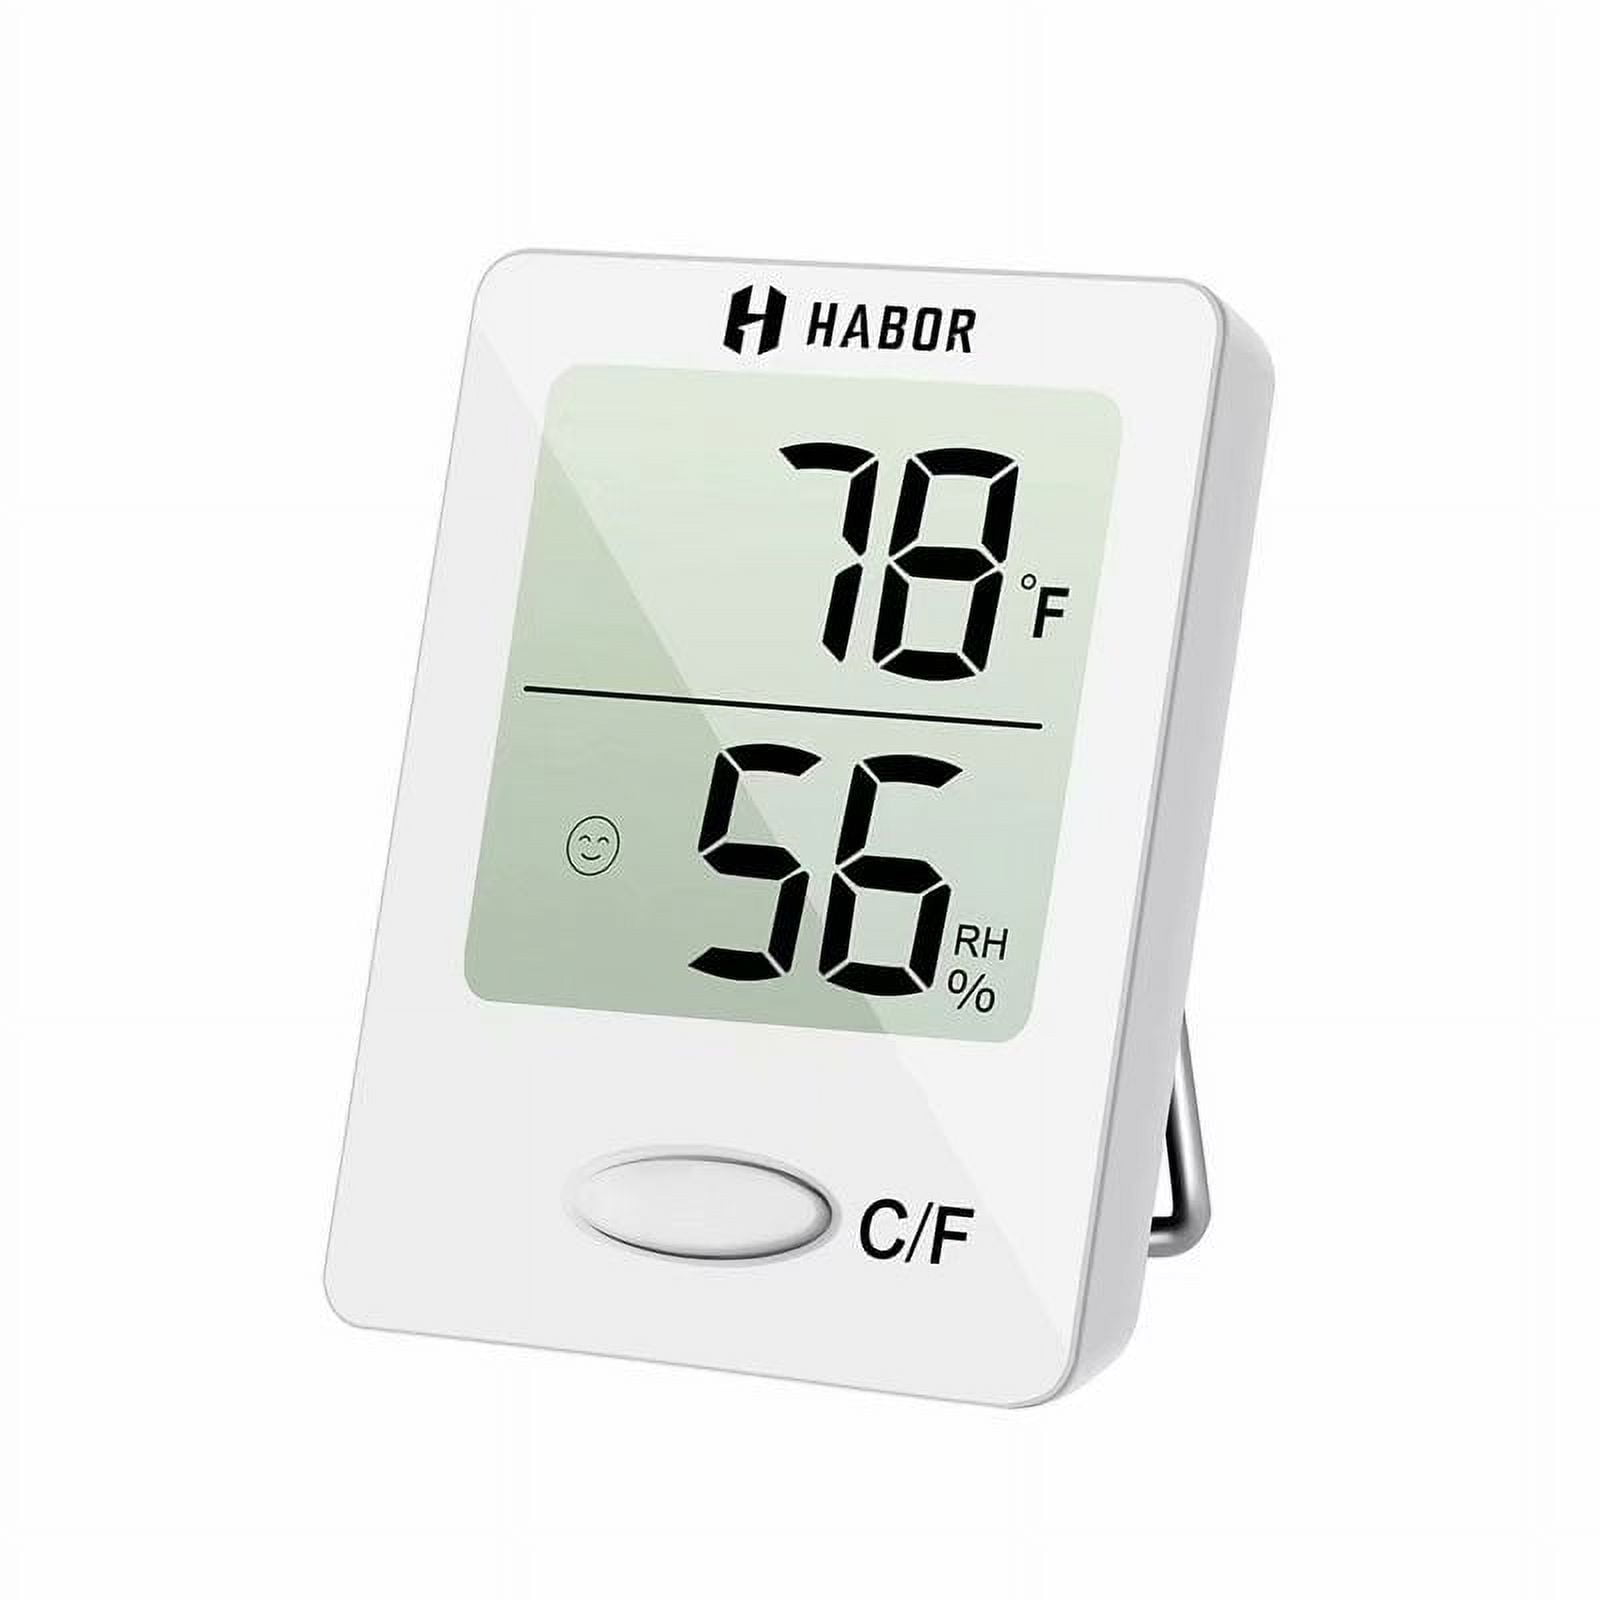 Thermometer Digital for Room Temperature or Ambient Air - Medicare